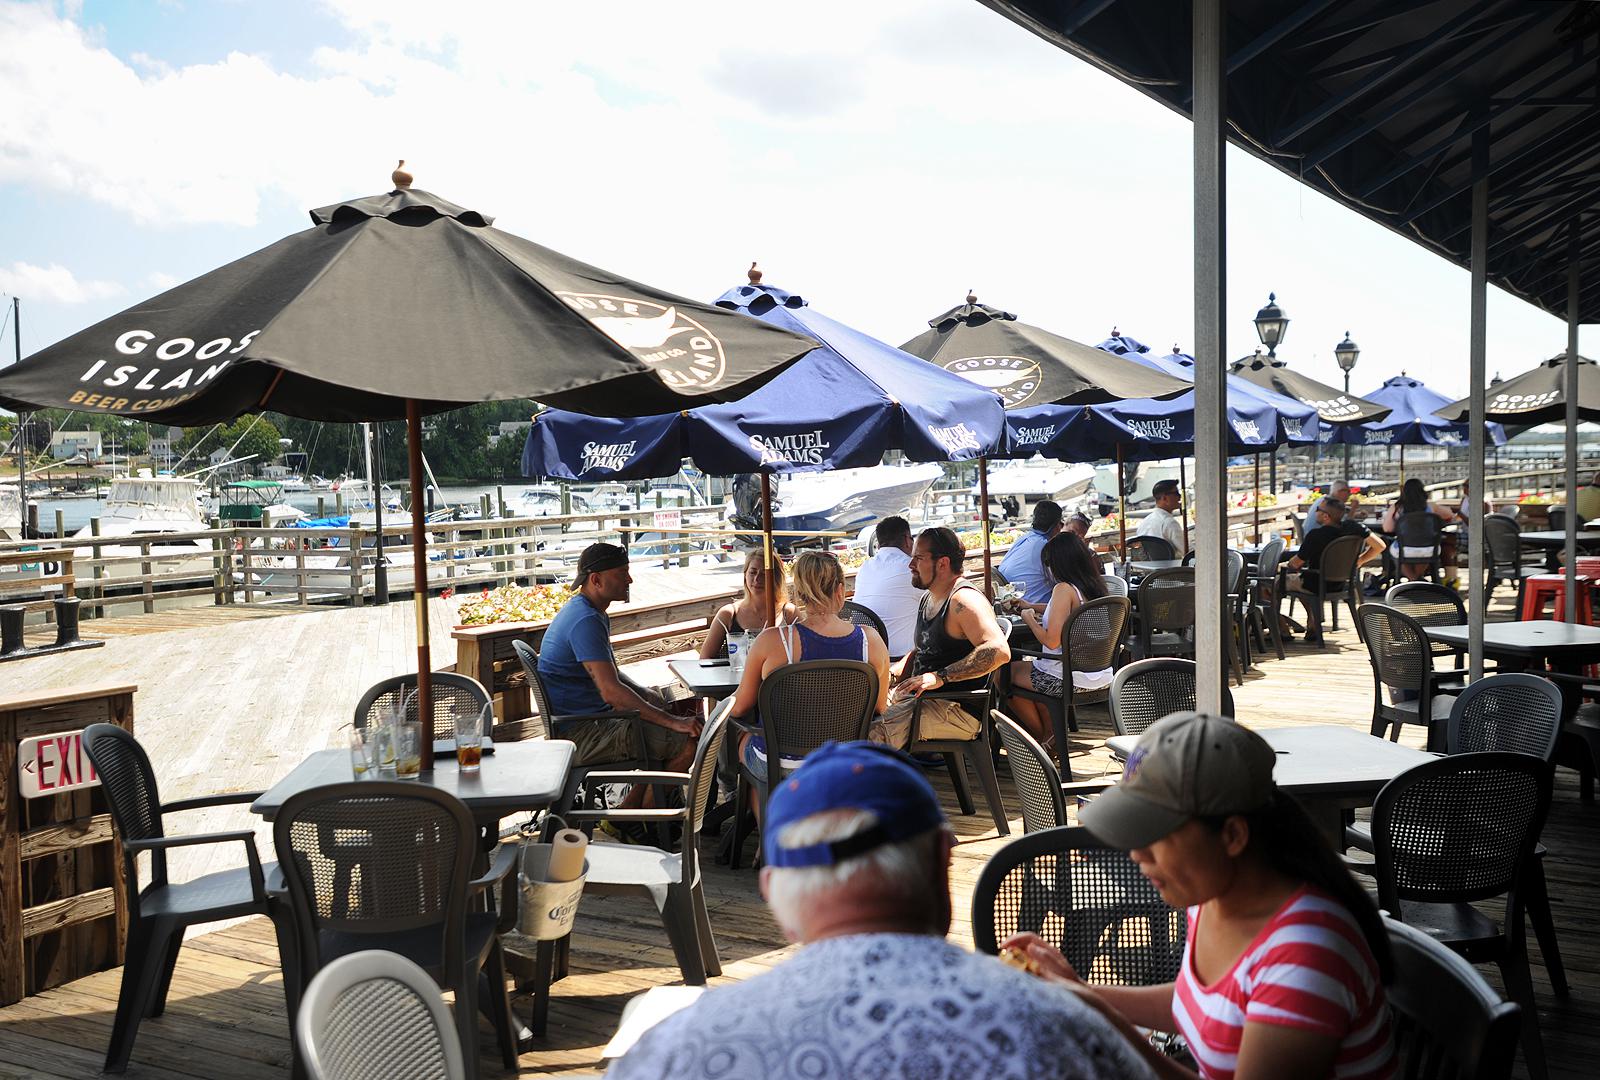 Yes to outdoor dining, but no to amplified outdoor entertainment